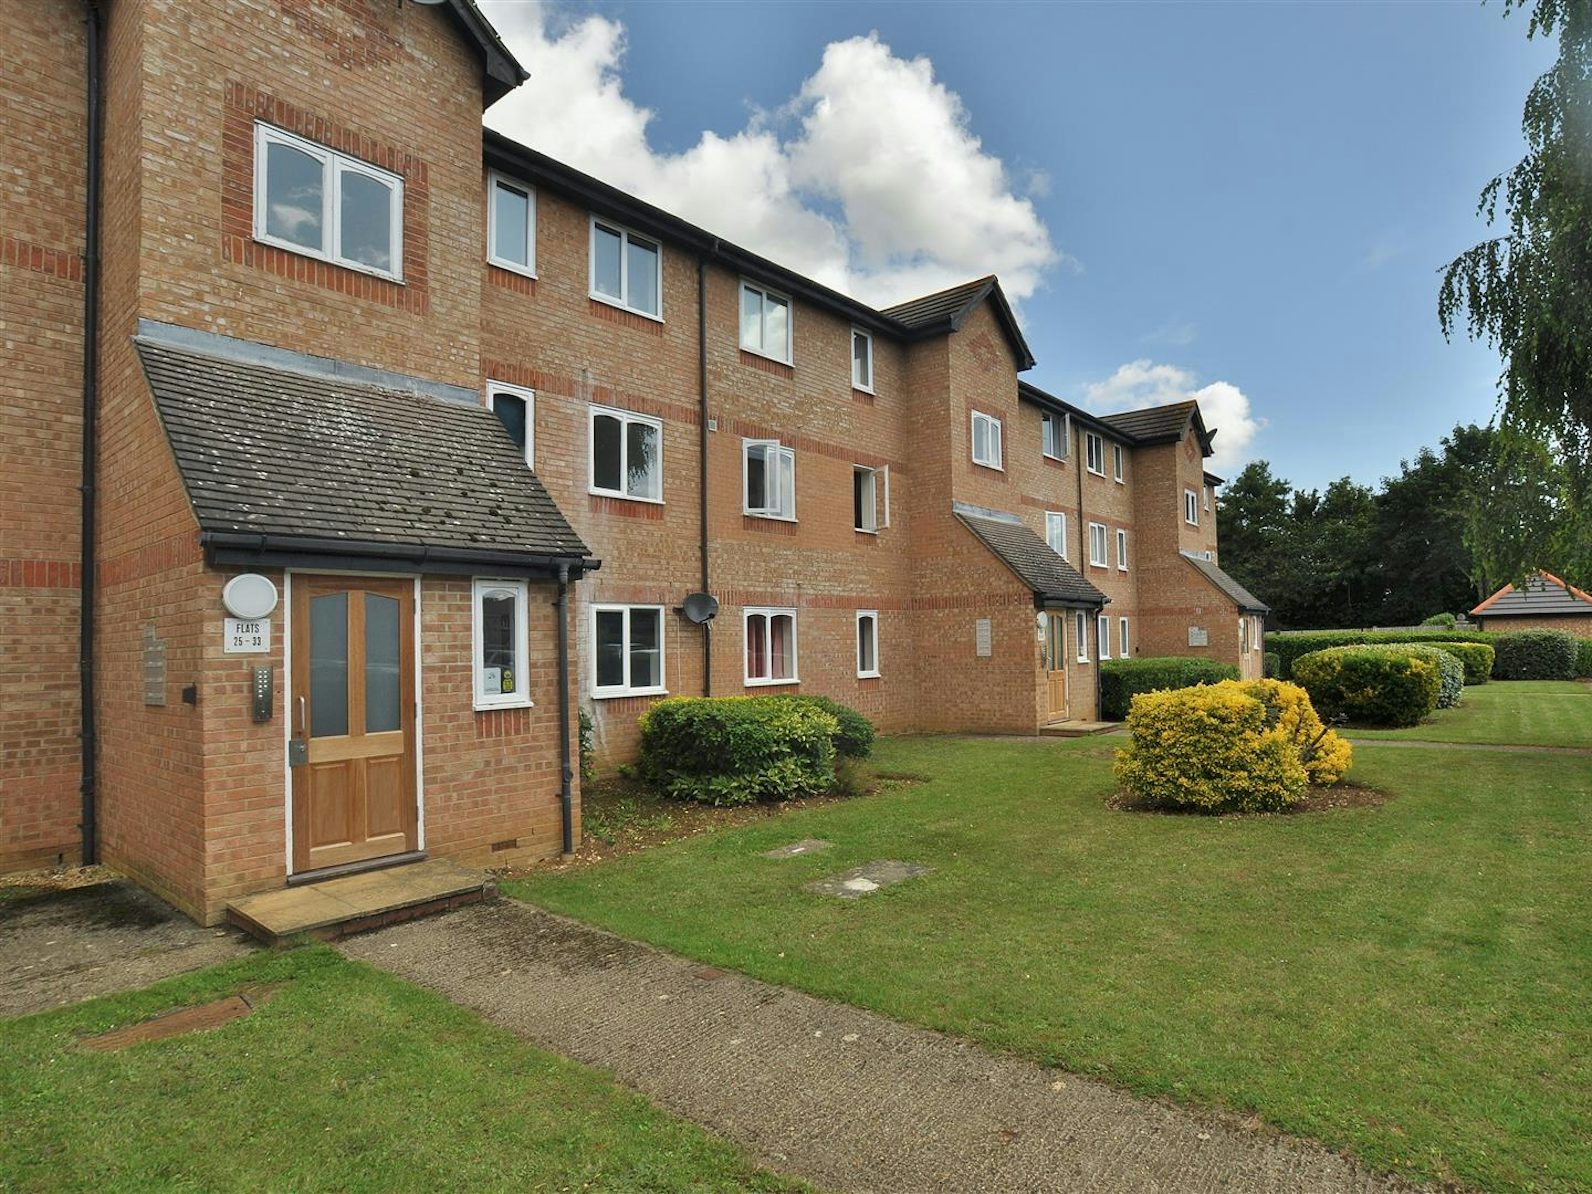 Flat for sale on Wedgewood Road Hitchin, SG4